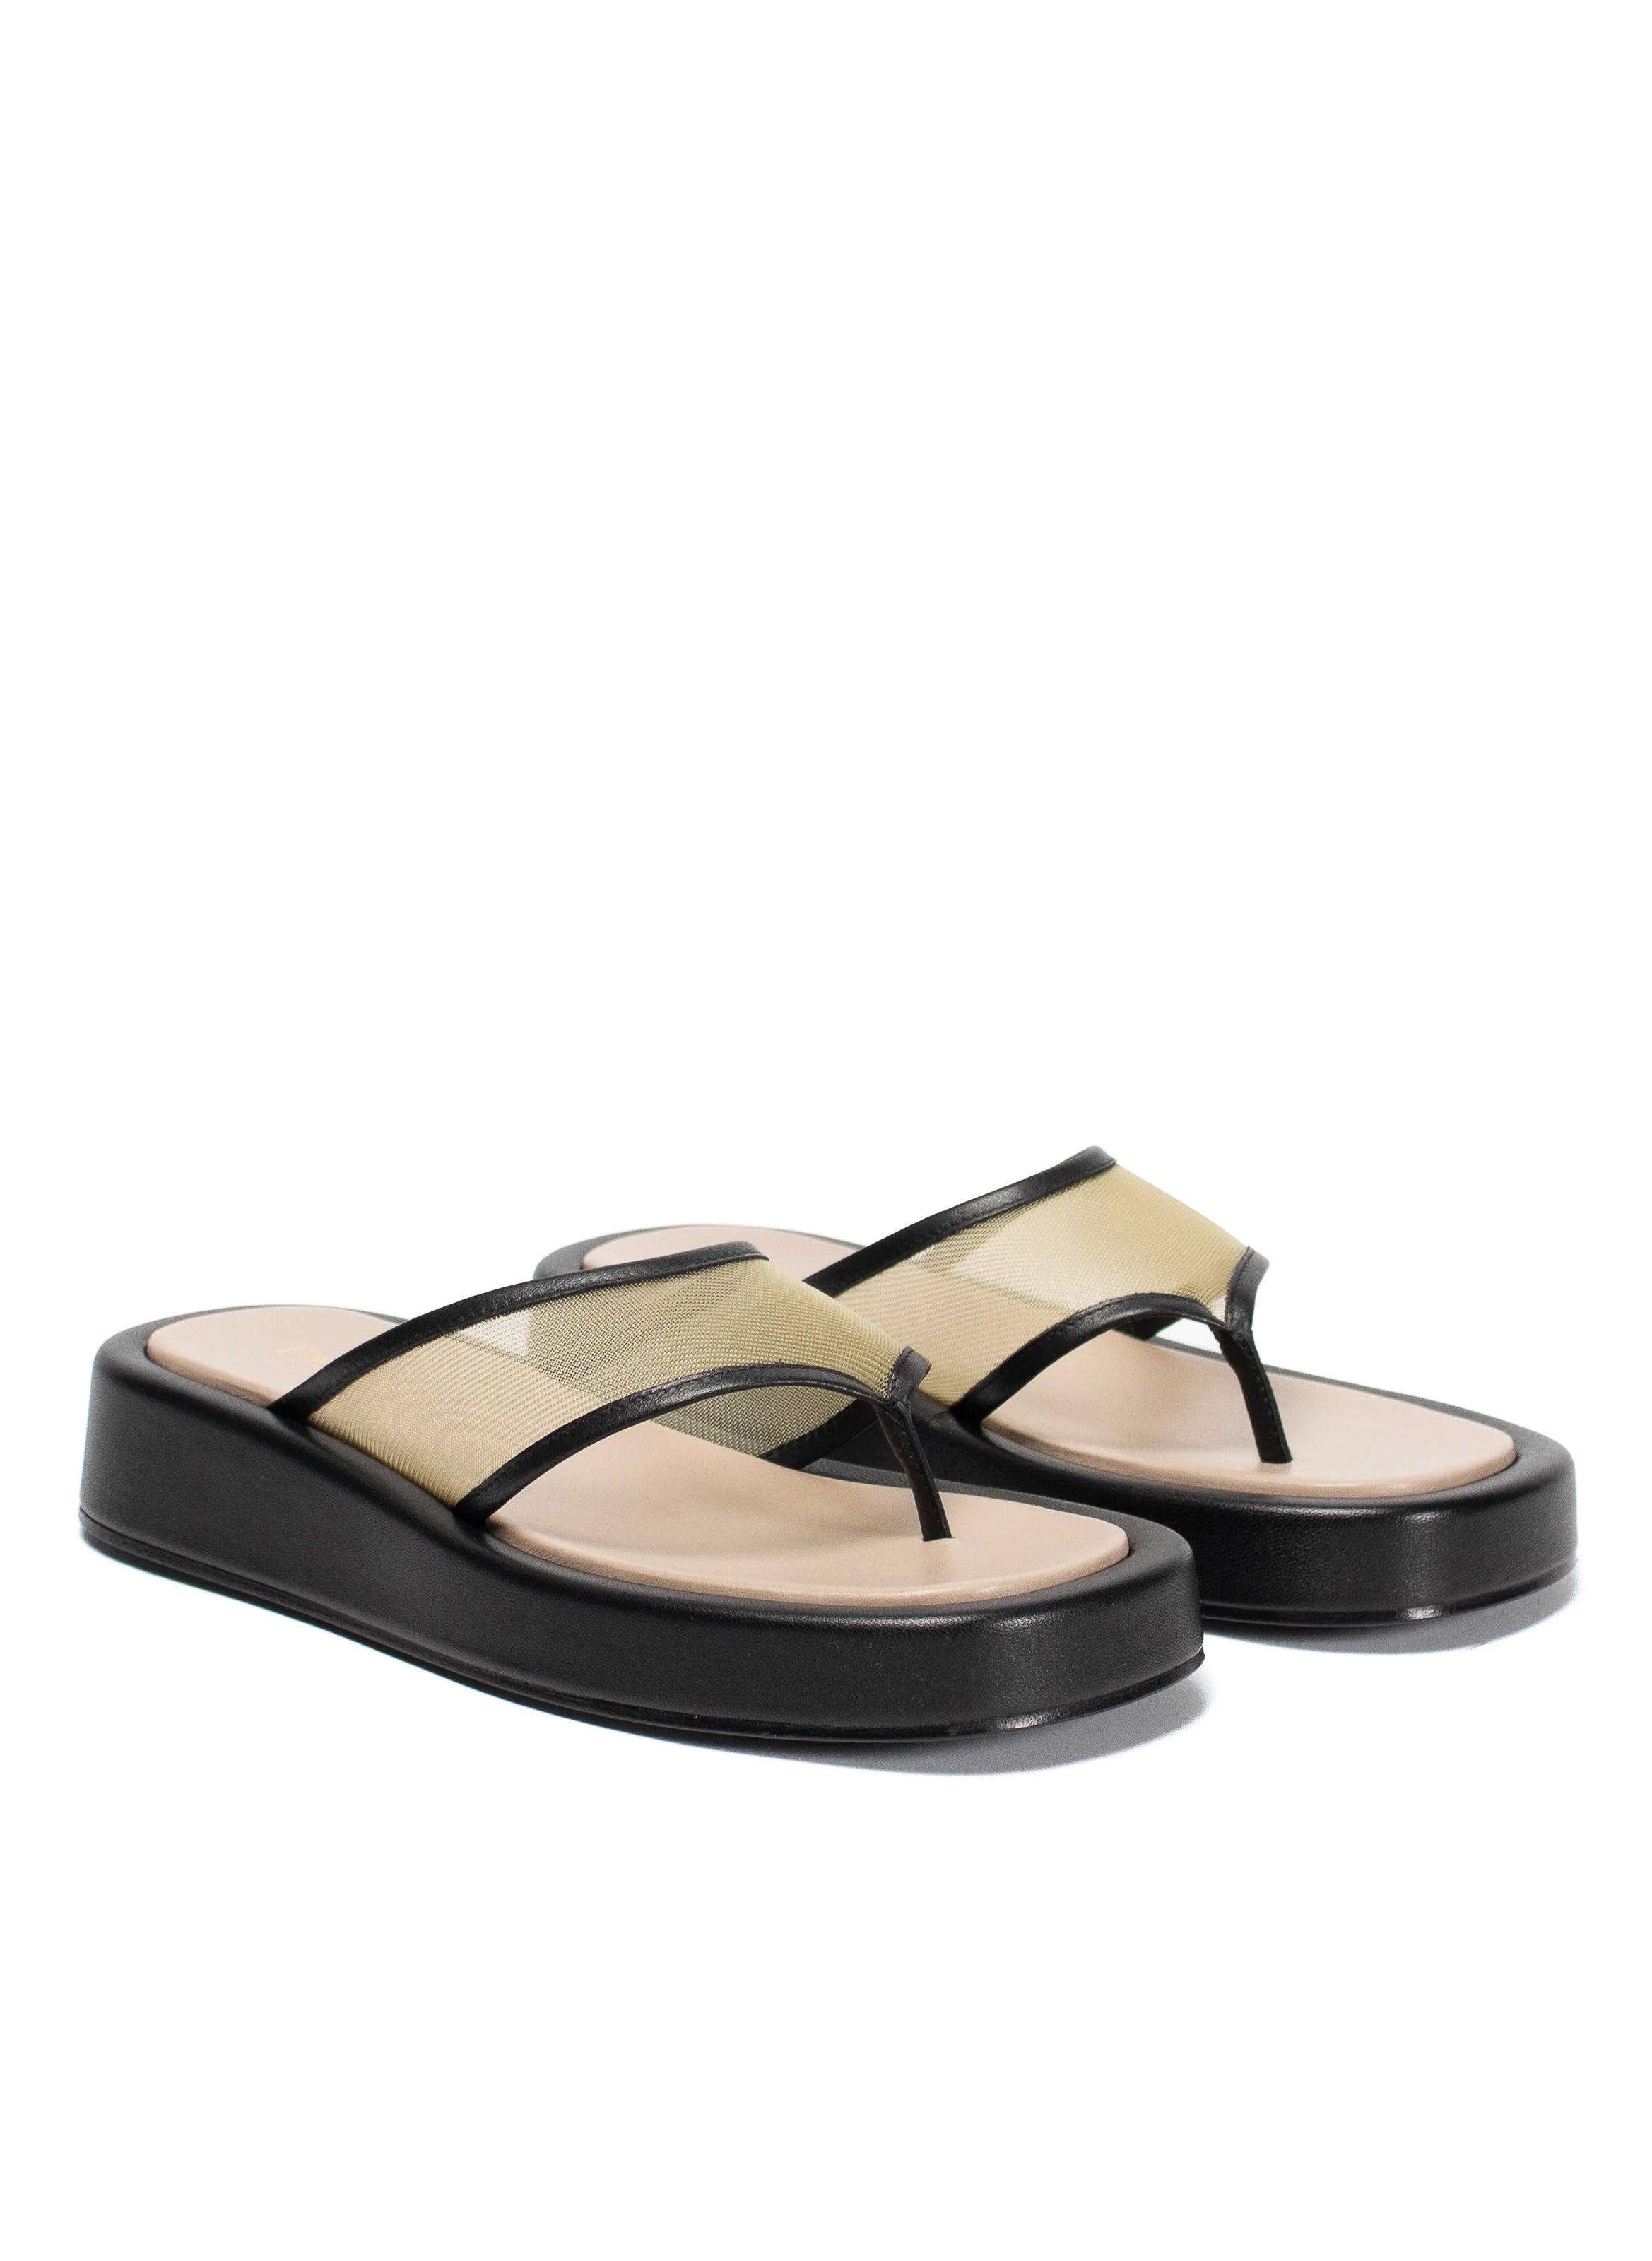 Buy Grey Flat Sandals for Women by STYLE SHOES Online | Ajio.com